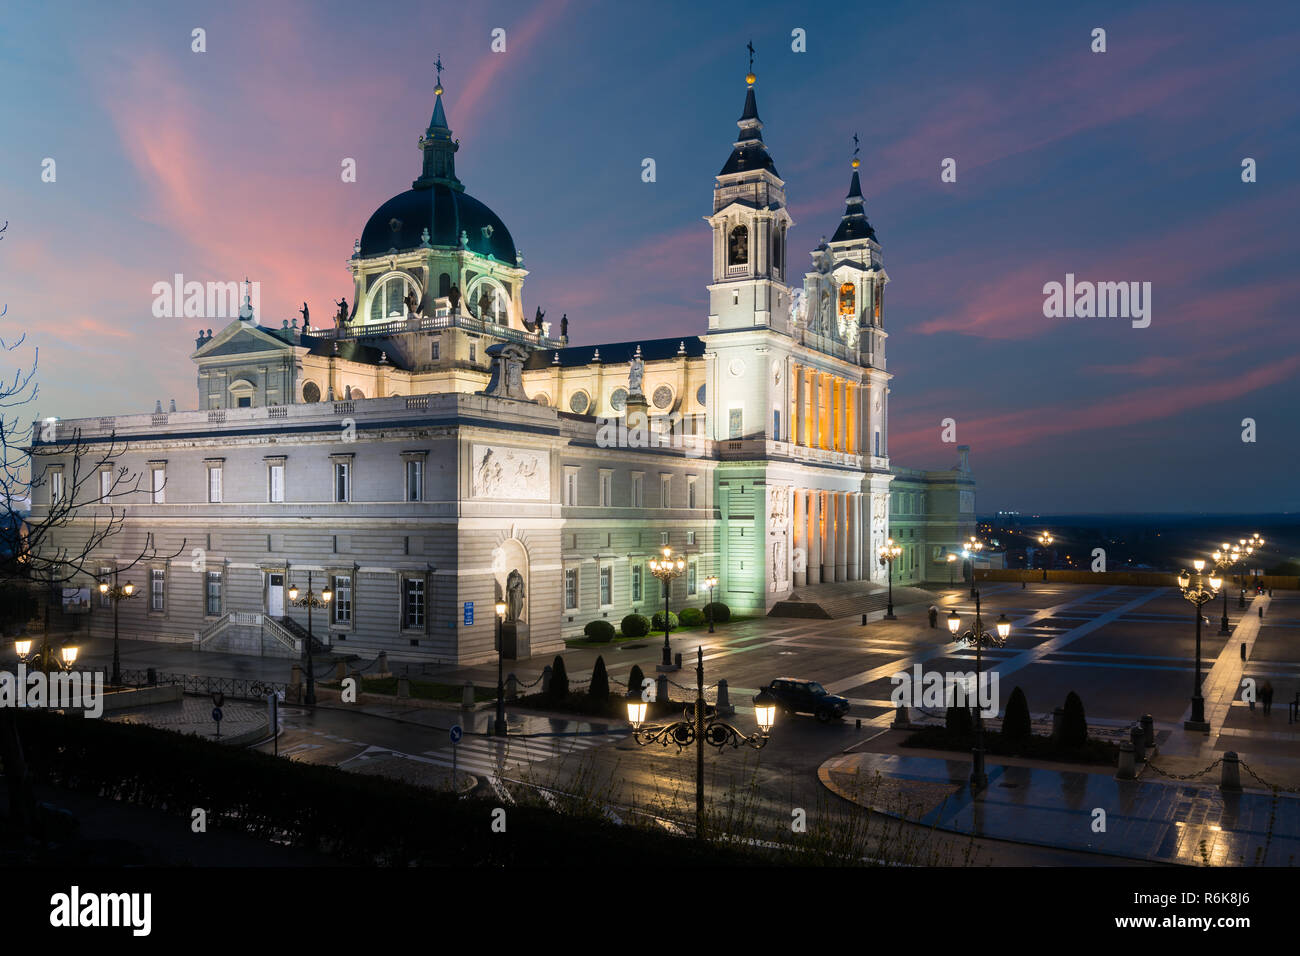 Madrid. Image of Madrid skyline with Santa Maria la Real de La Almudena Cathedral and the Royal Palace during sunset. Stock Photo